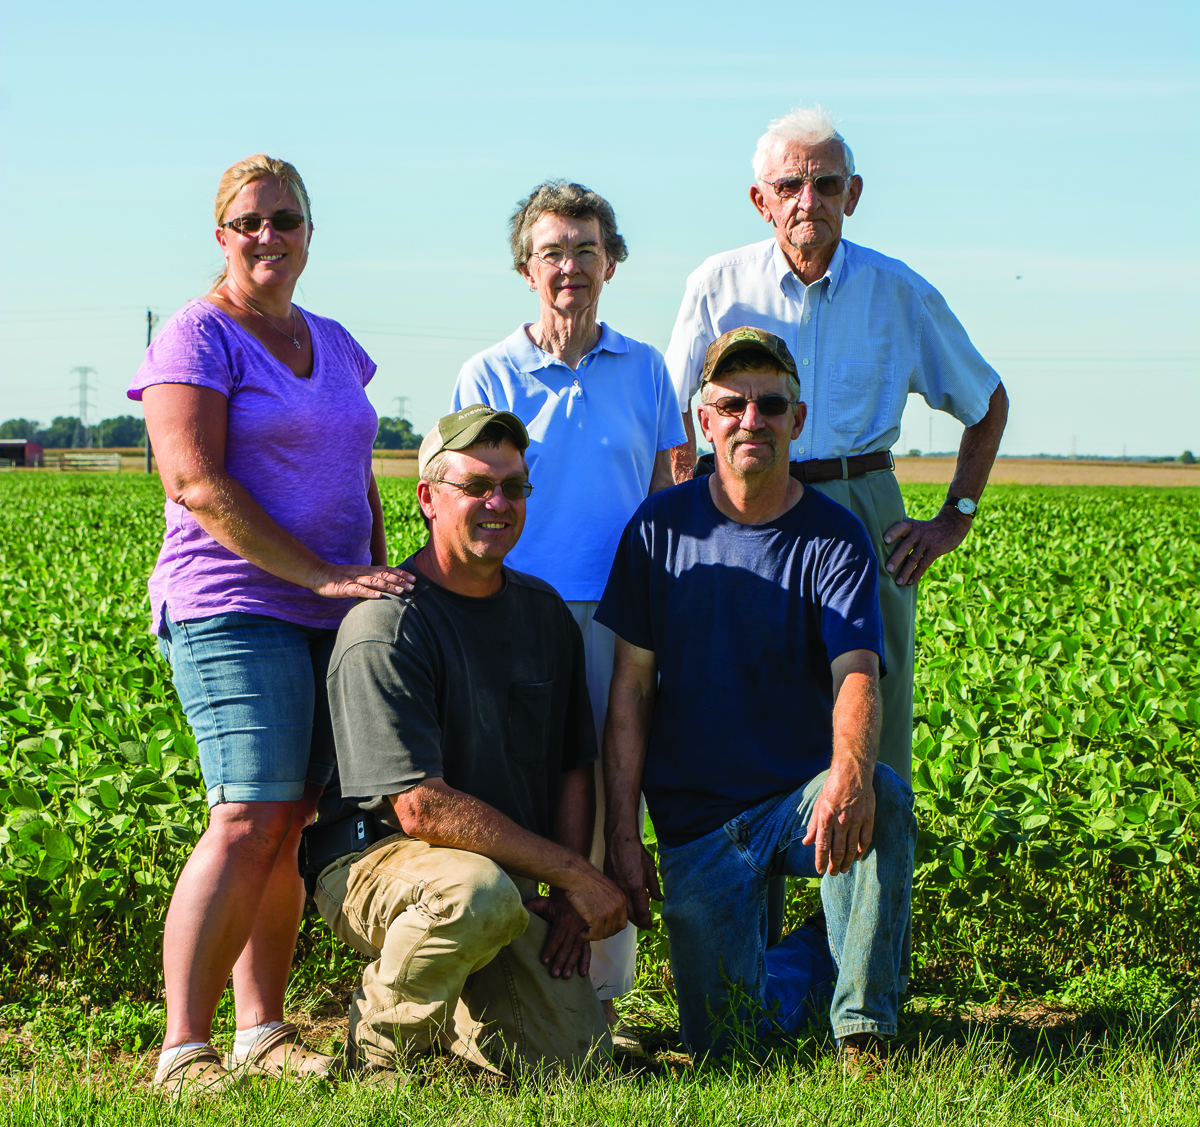 Schmidt Farms is a third generation family farm, operated by Hans and his wife, Jennie, and Hans’ brother, Alan and his wife Brenda.